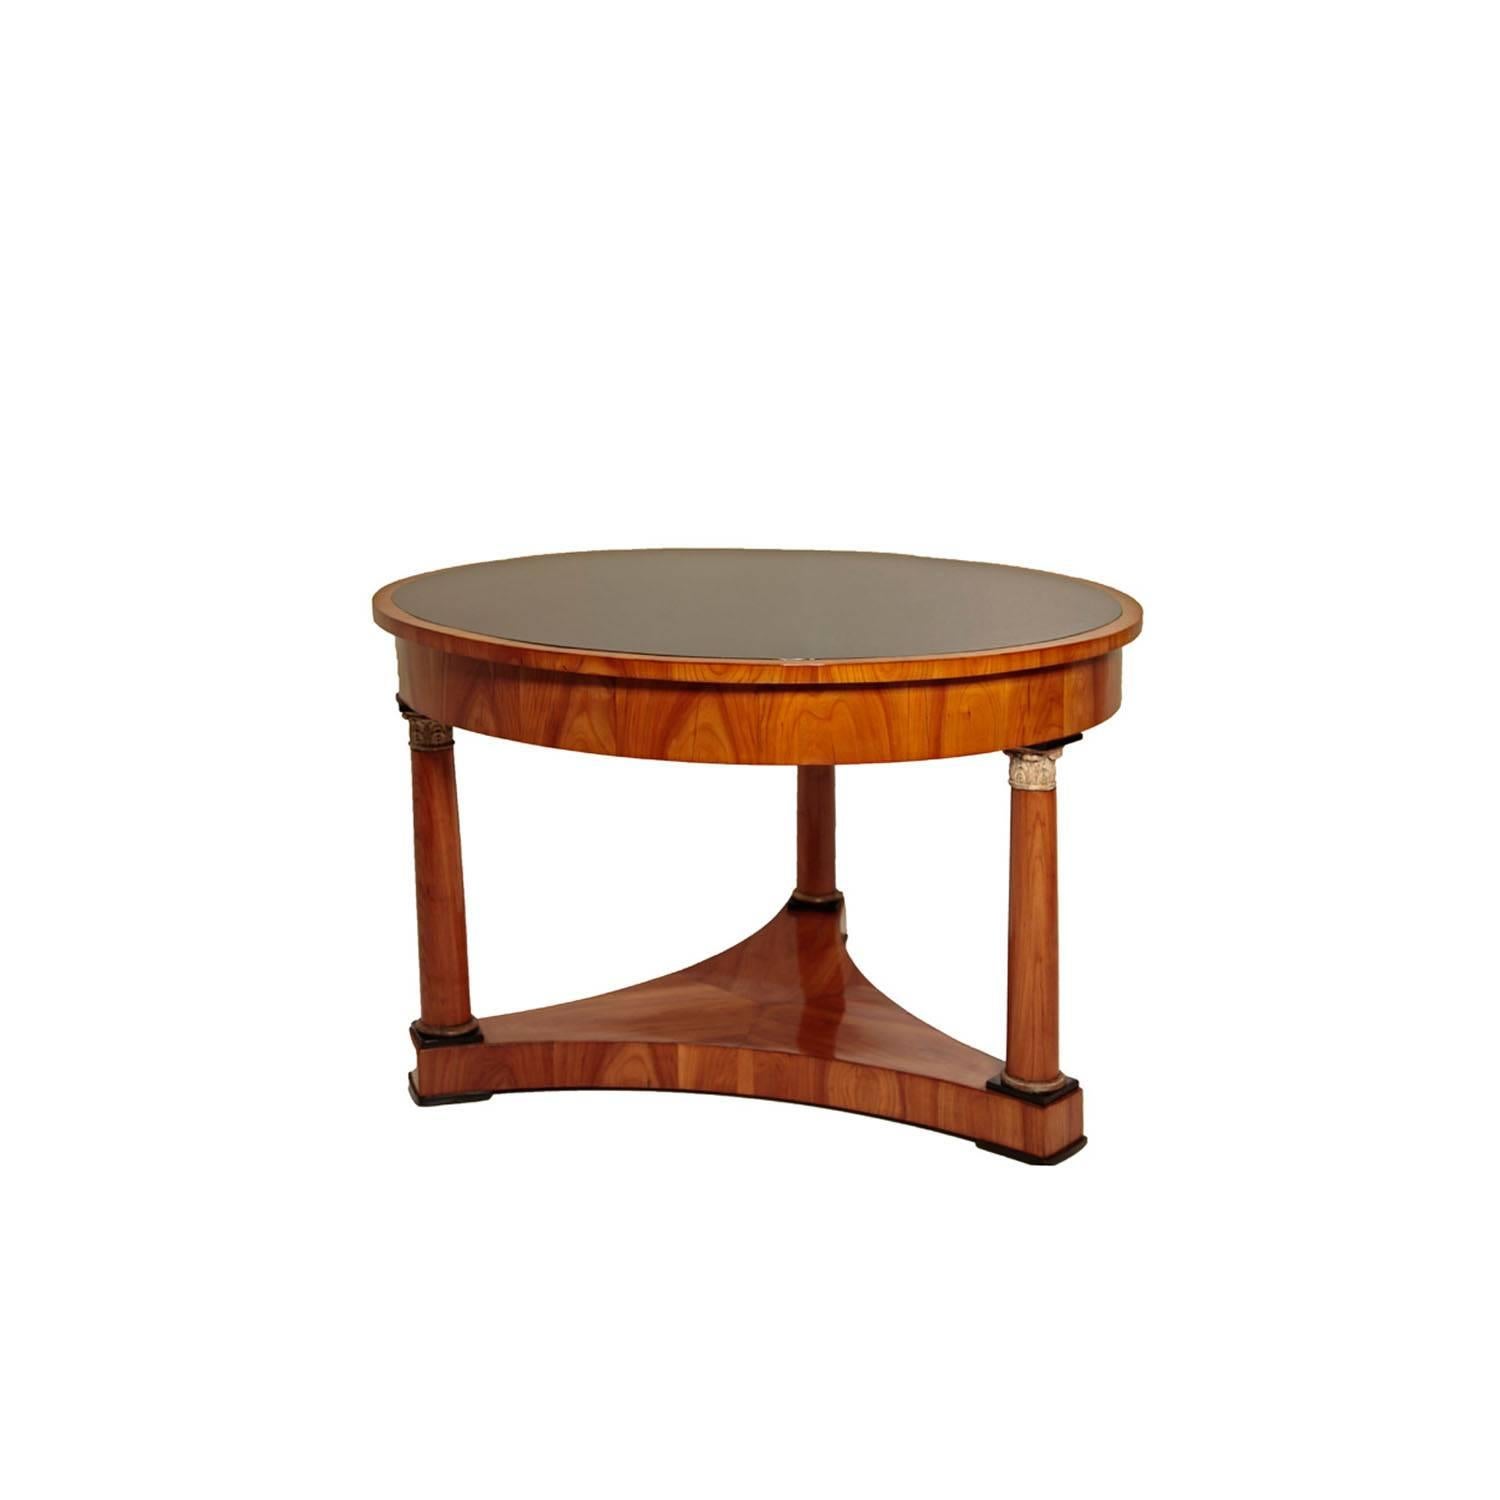 Early 19th Century Biedermeier Table, Southern Germany, 1810s-1820s